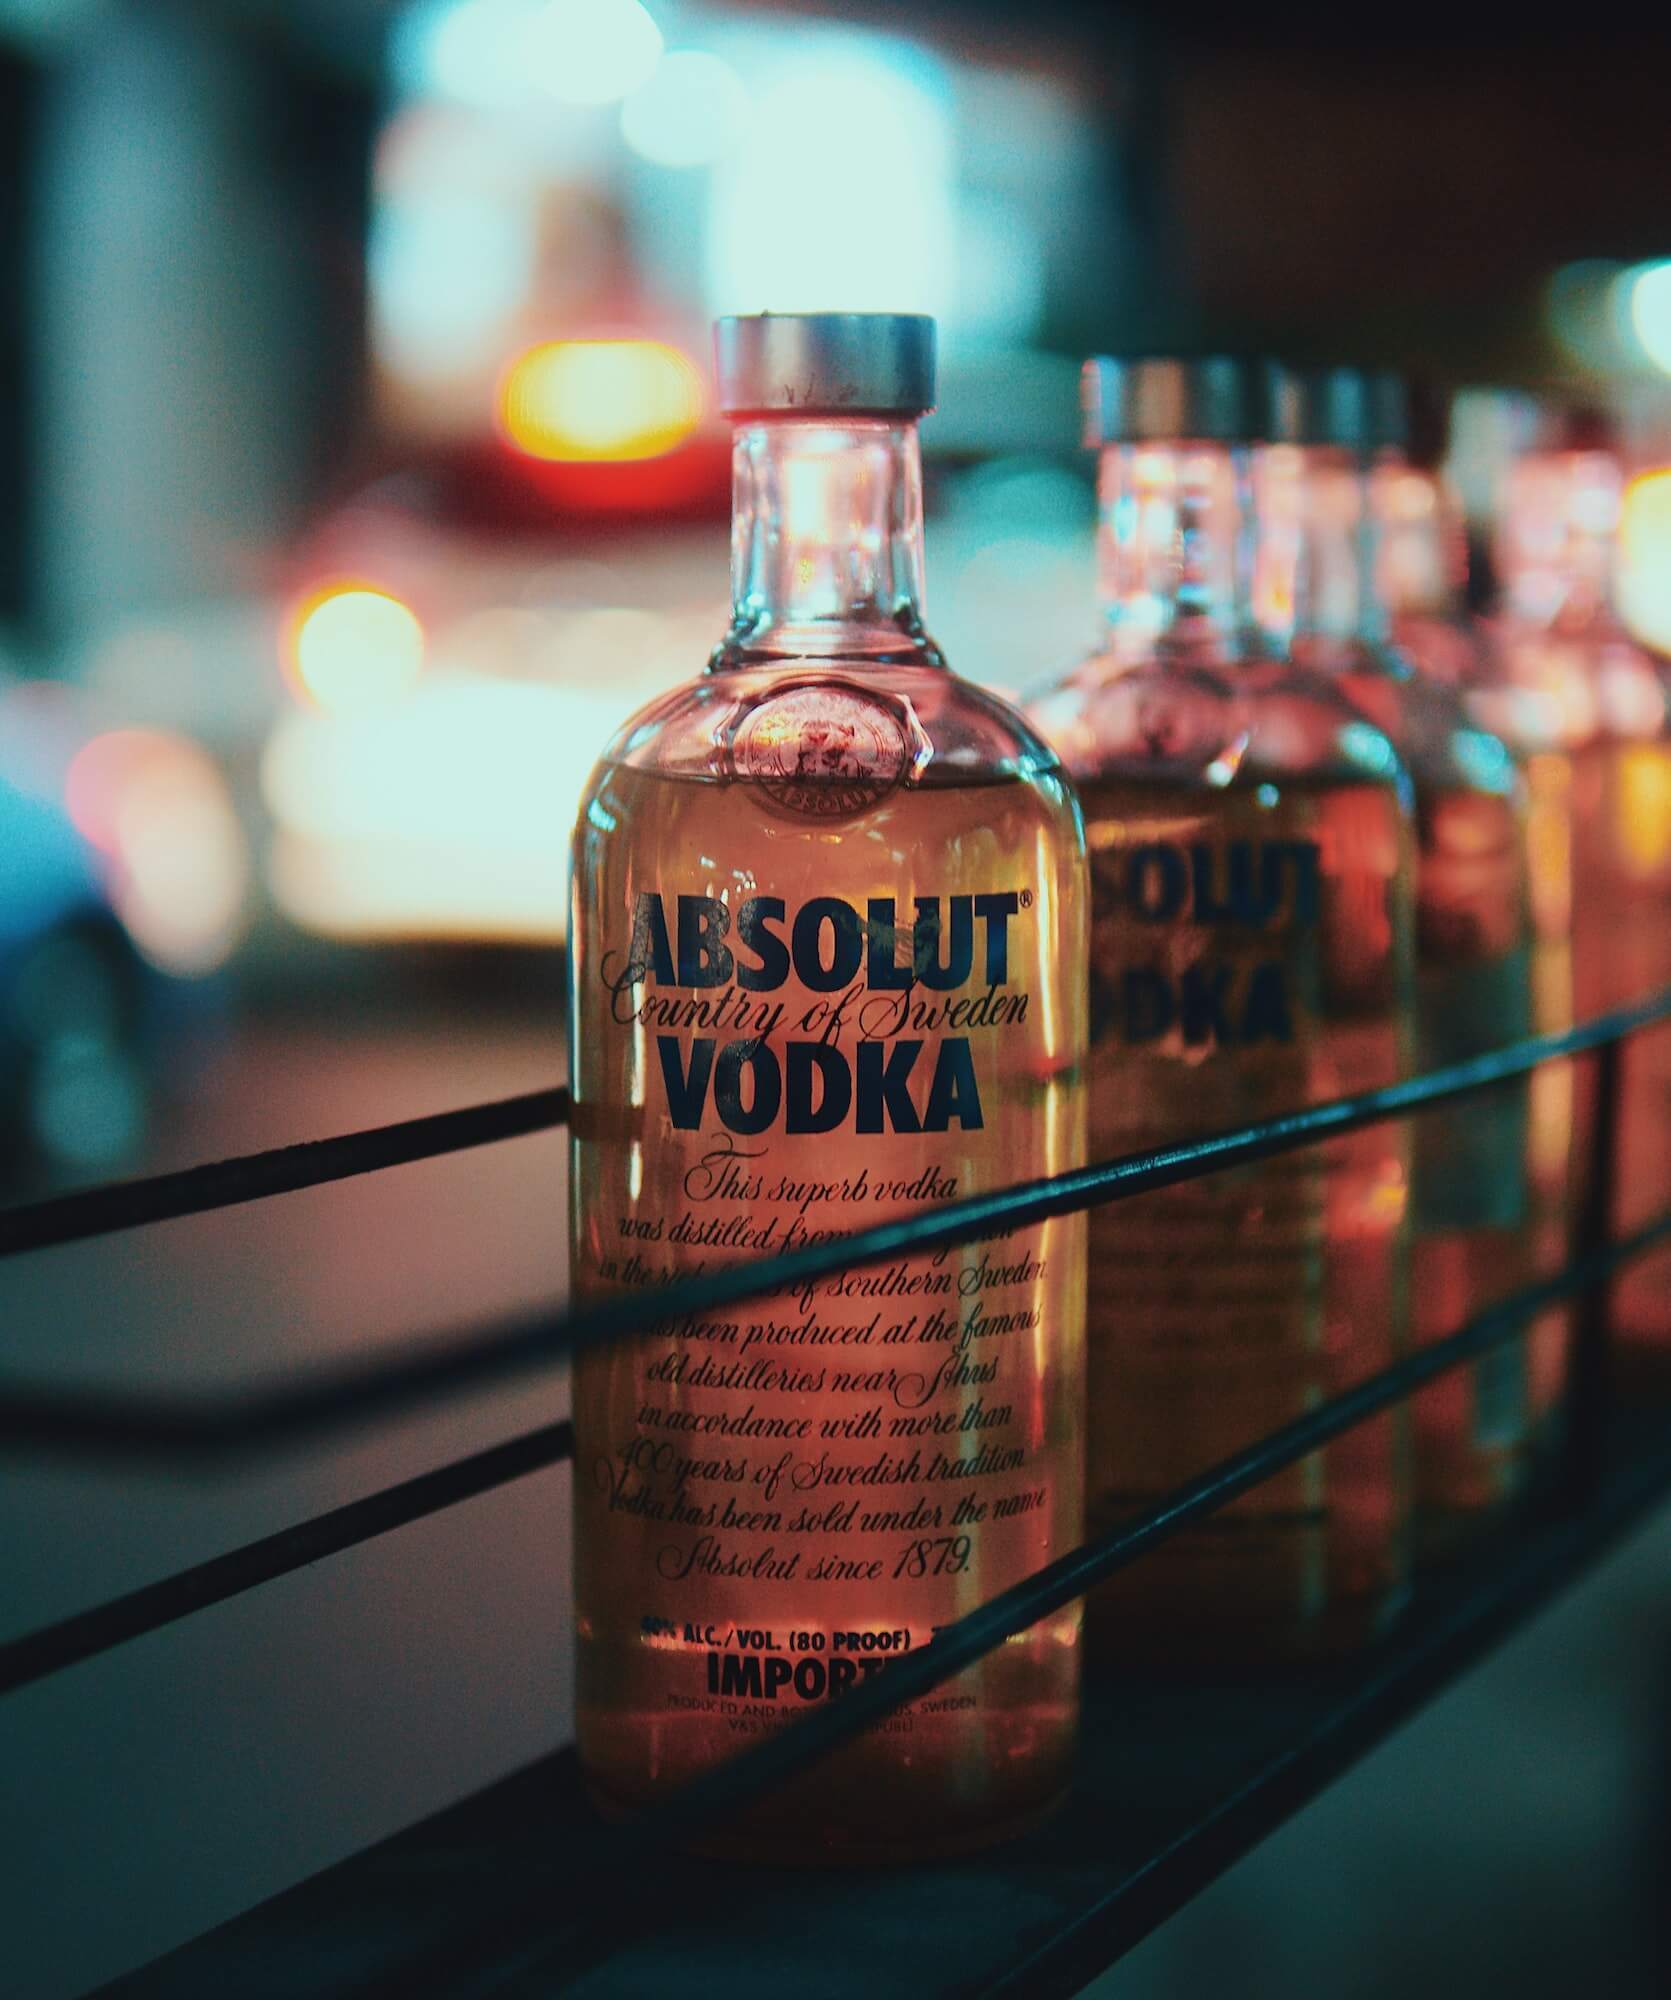 Row of Absolut vodka bottles with blurred bar background